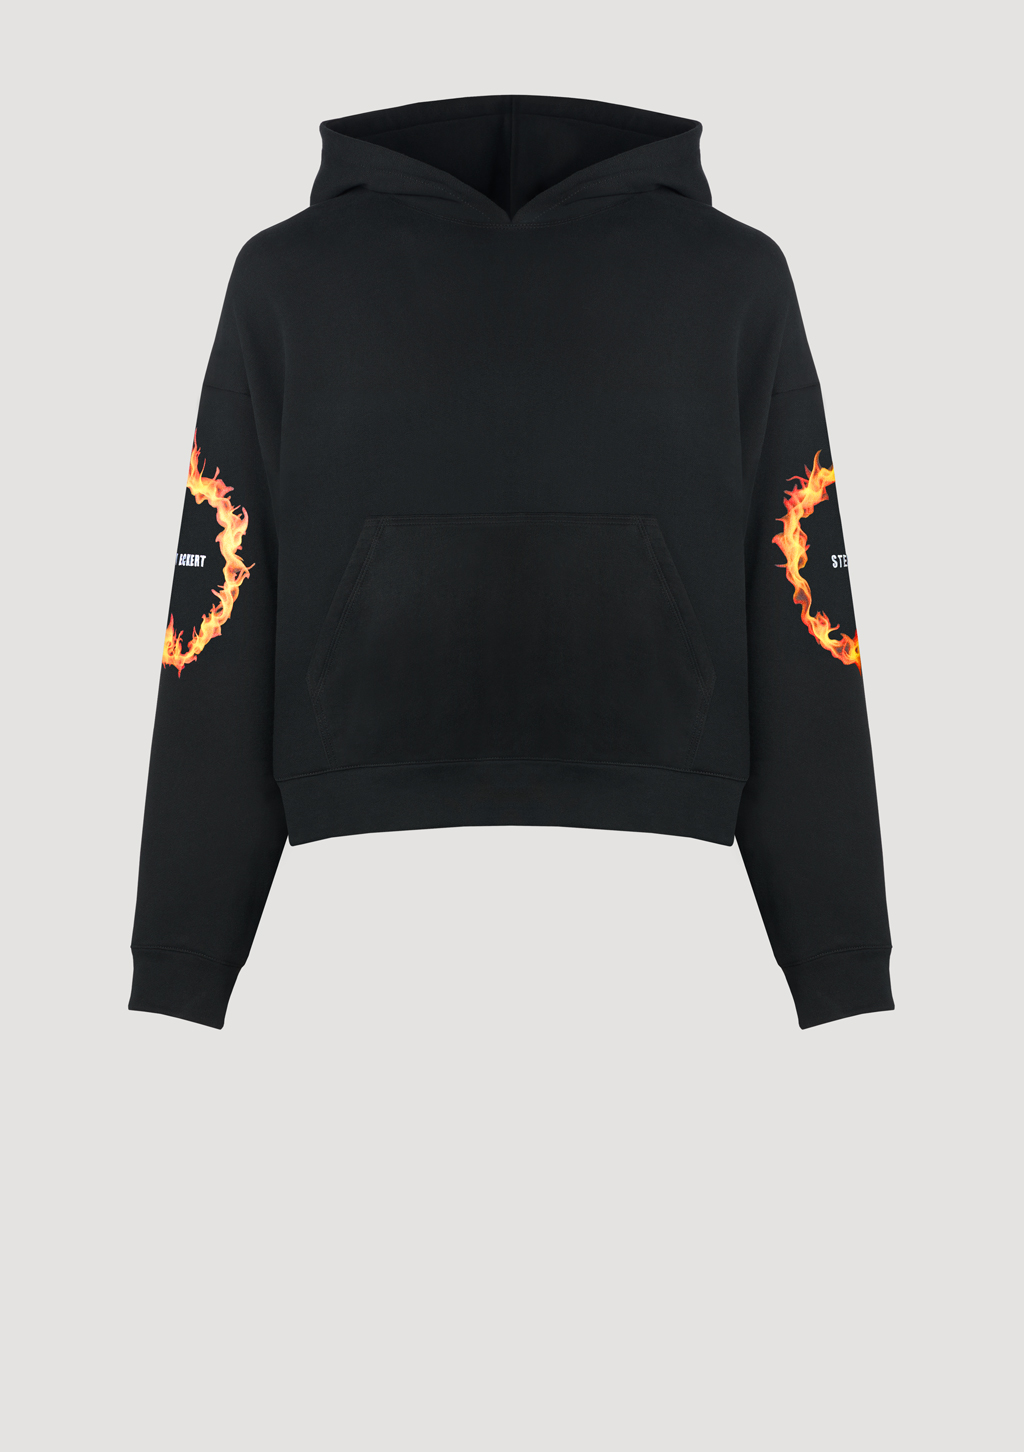 Designer Hoodie by Stefan Eckert, made of high quality organic cotton, color black, with ring fire digital print on sleeves. For women. Available in two sizes.